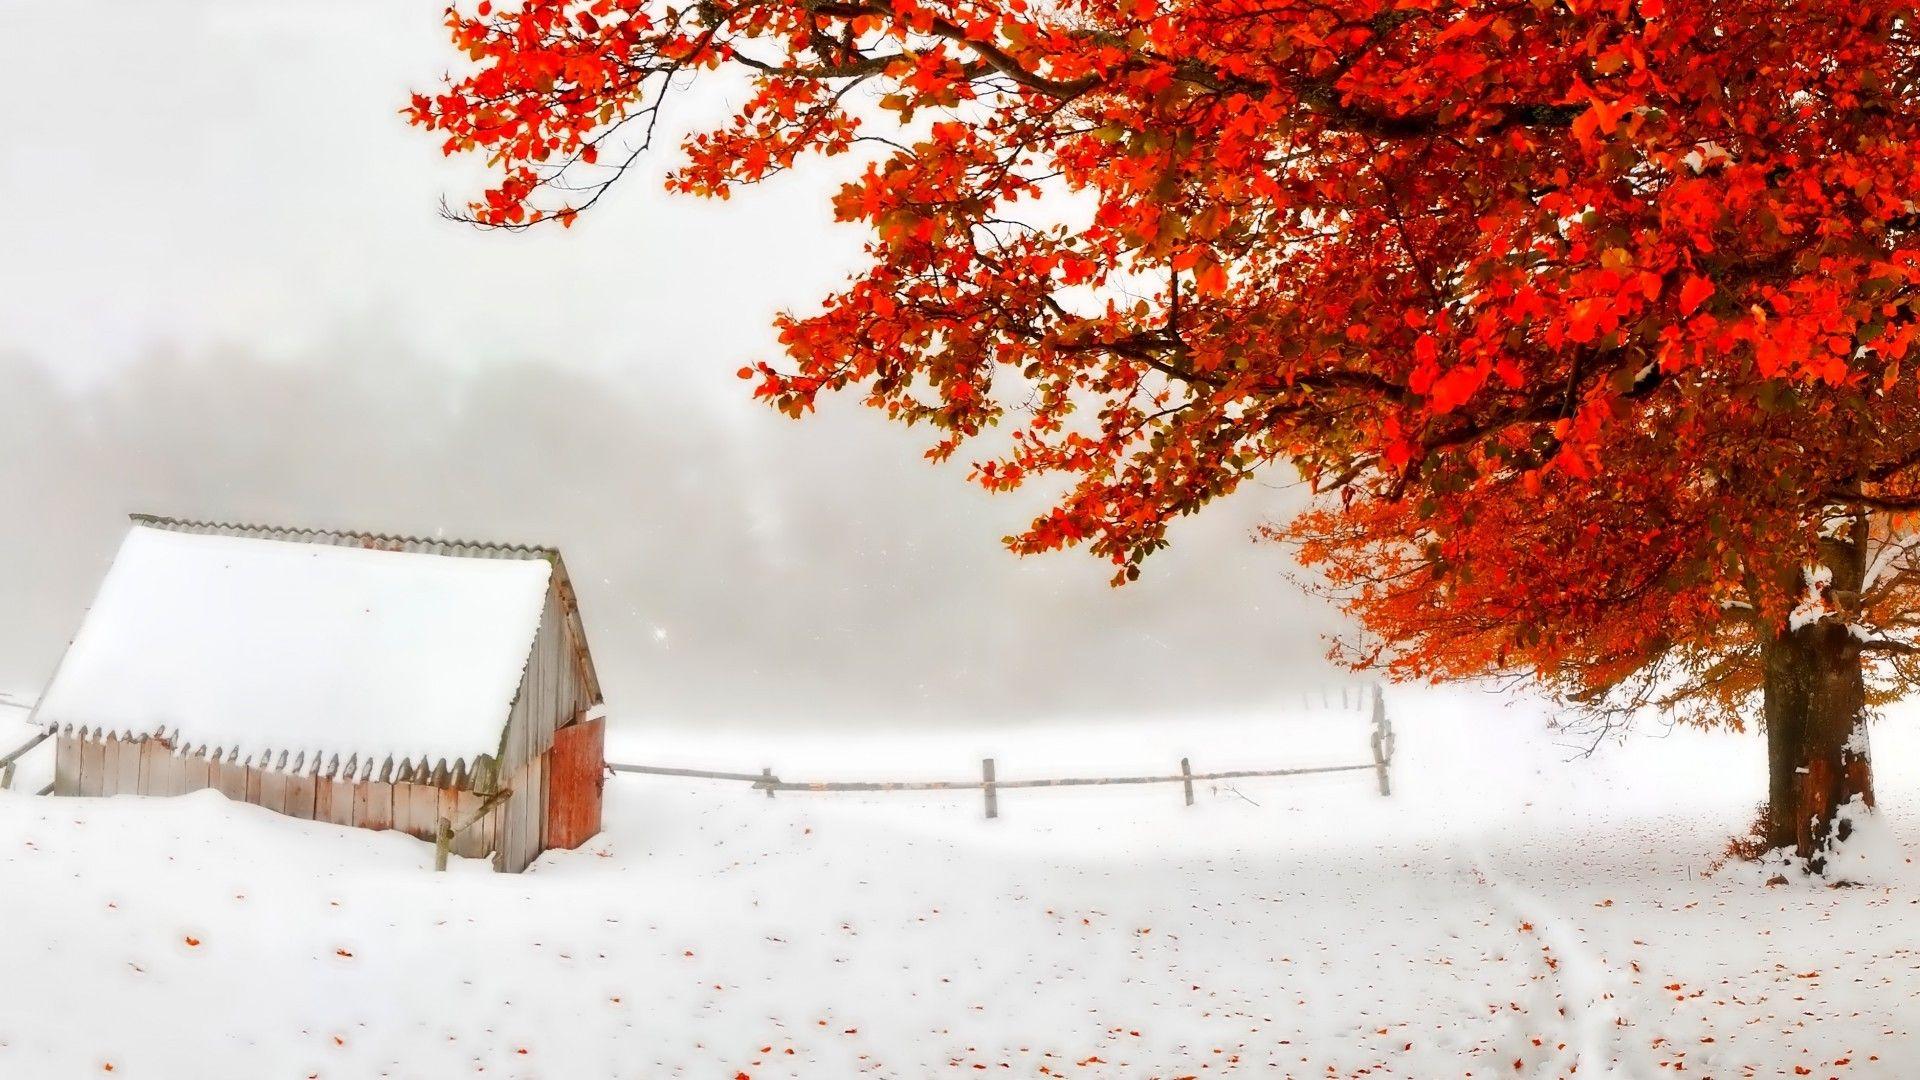 Storm Shack Tree Red Snow Leaves Early Autumn Countryside